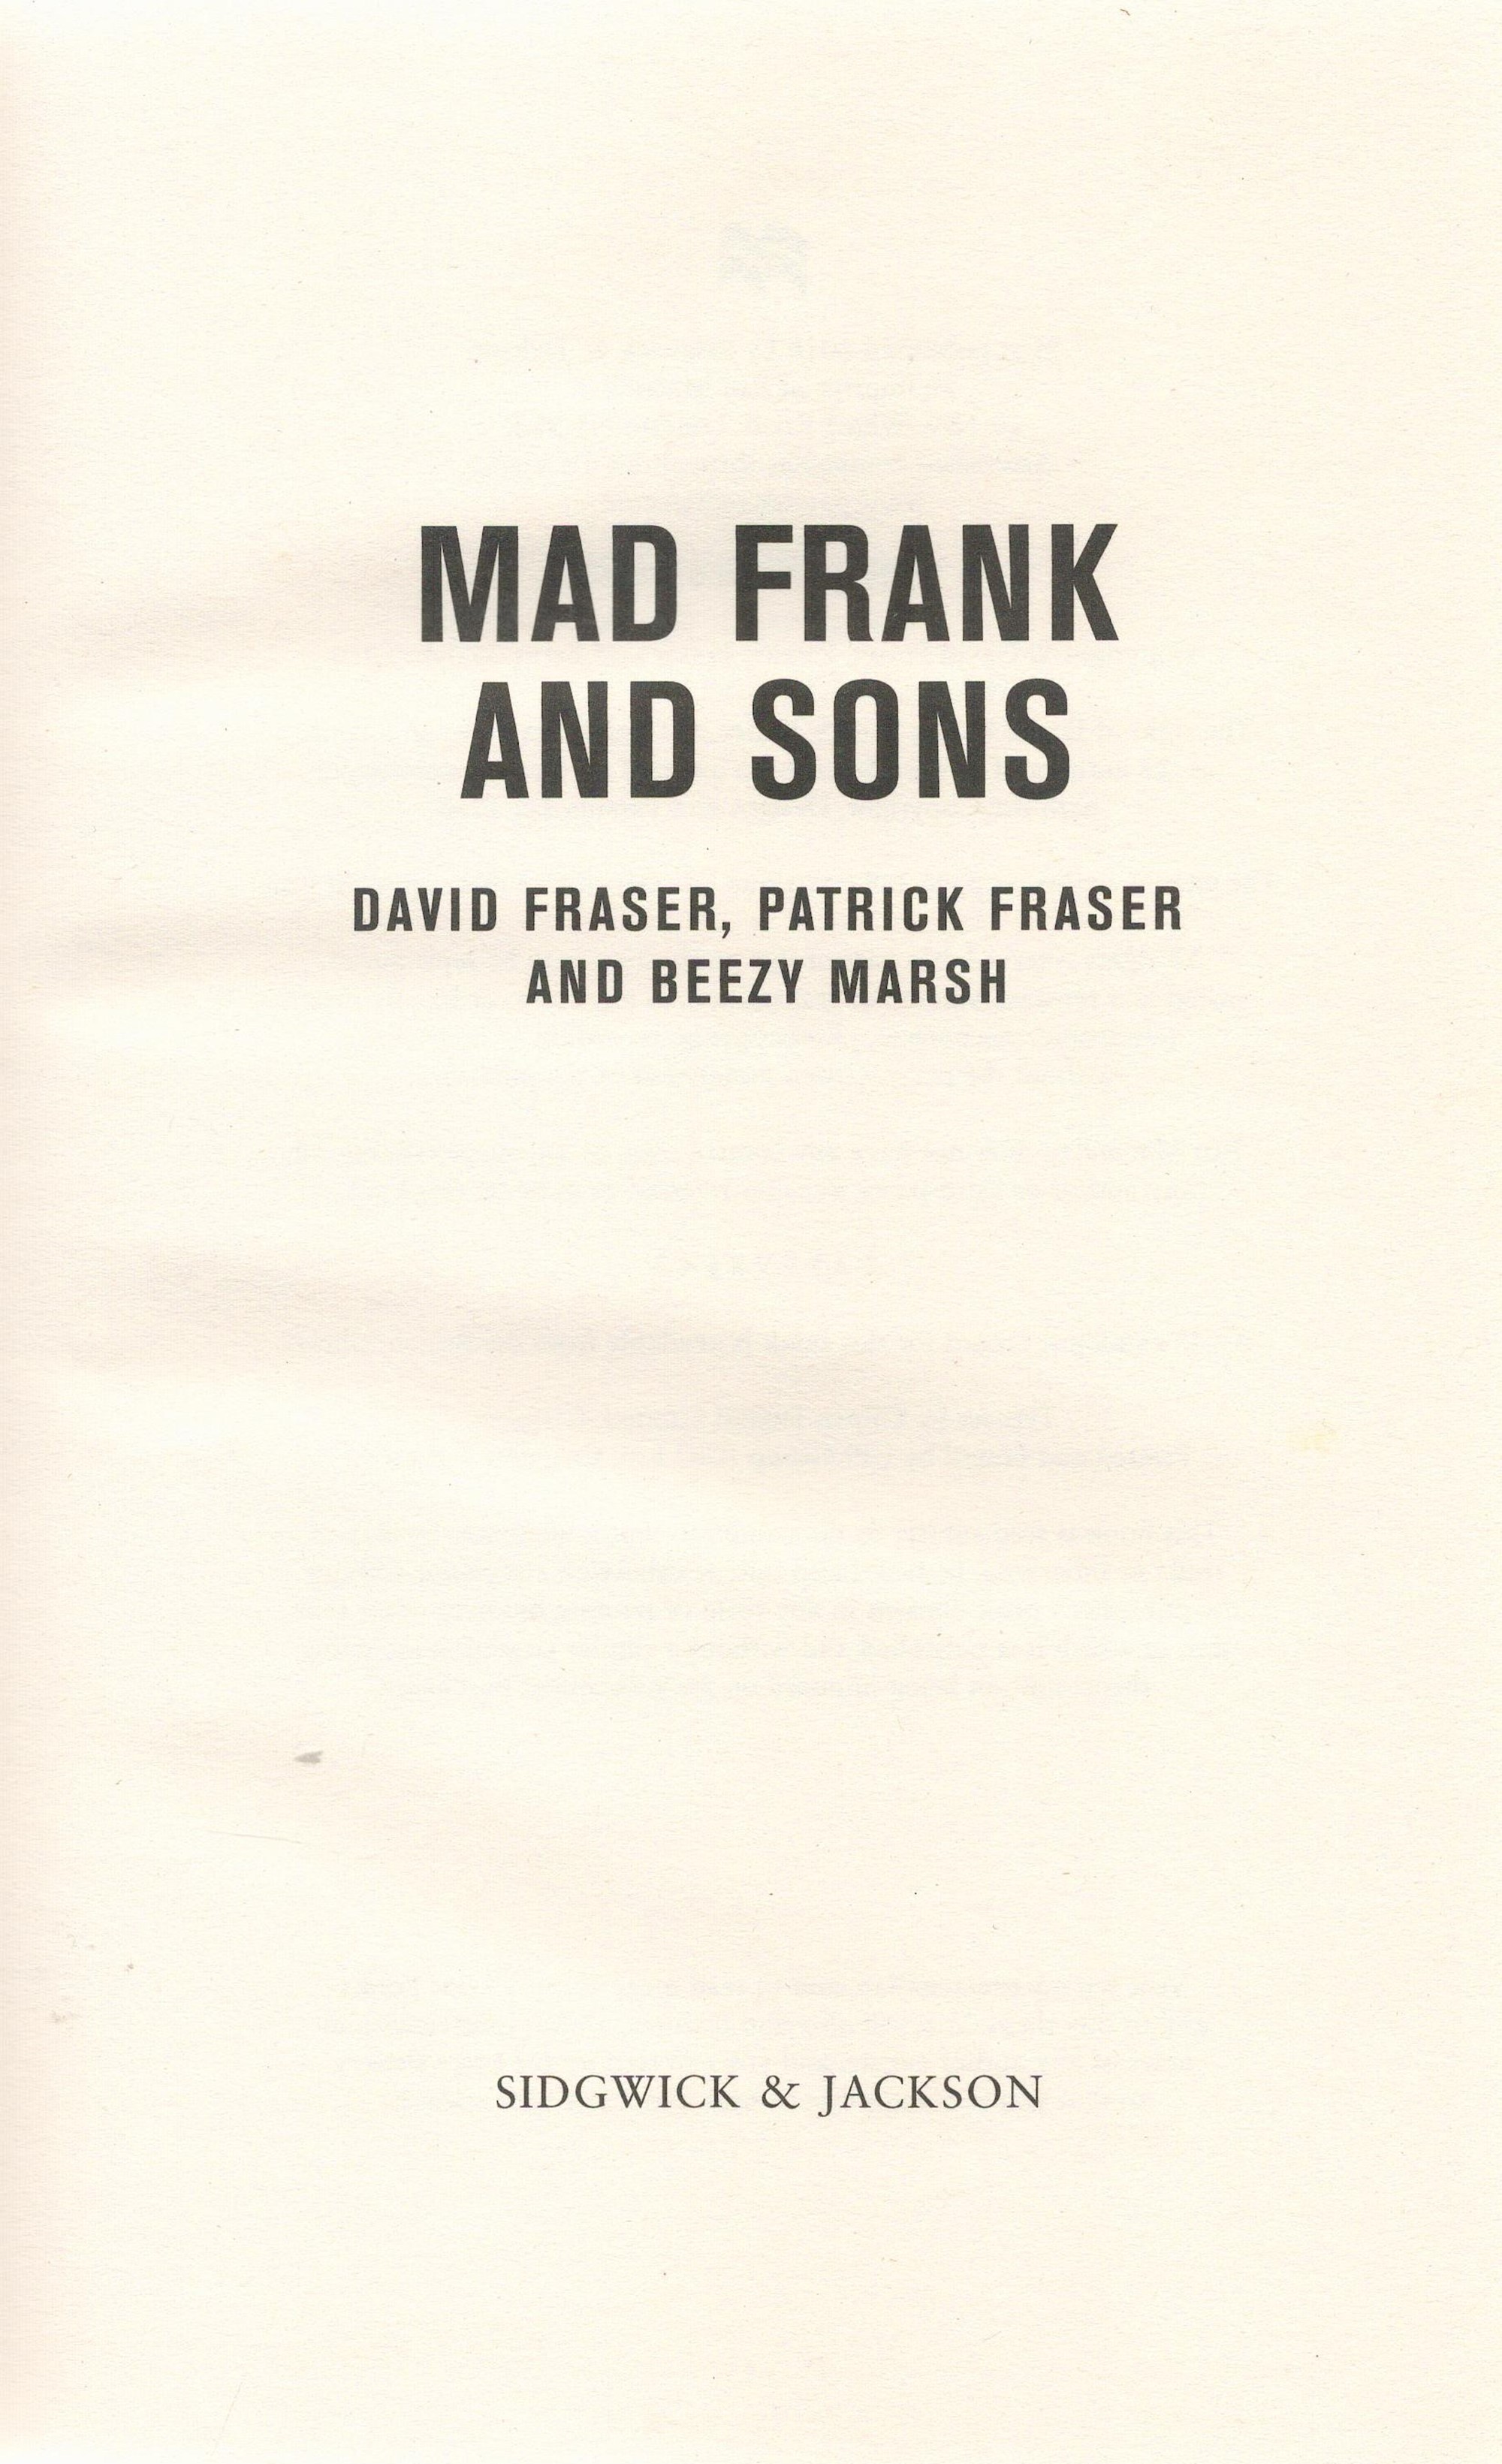 Mad Frank and Sons by David Fraser, Patrick Fraser and Beezy Marsh Hardback Book 2016 First - Image 4 of 6